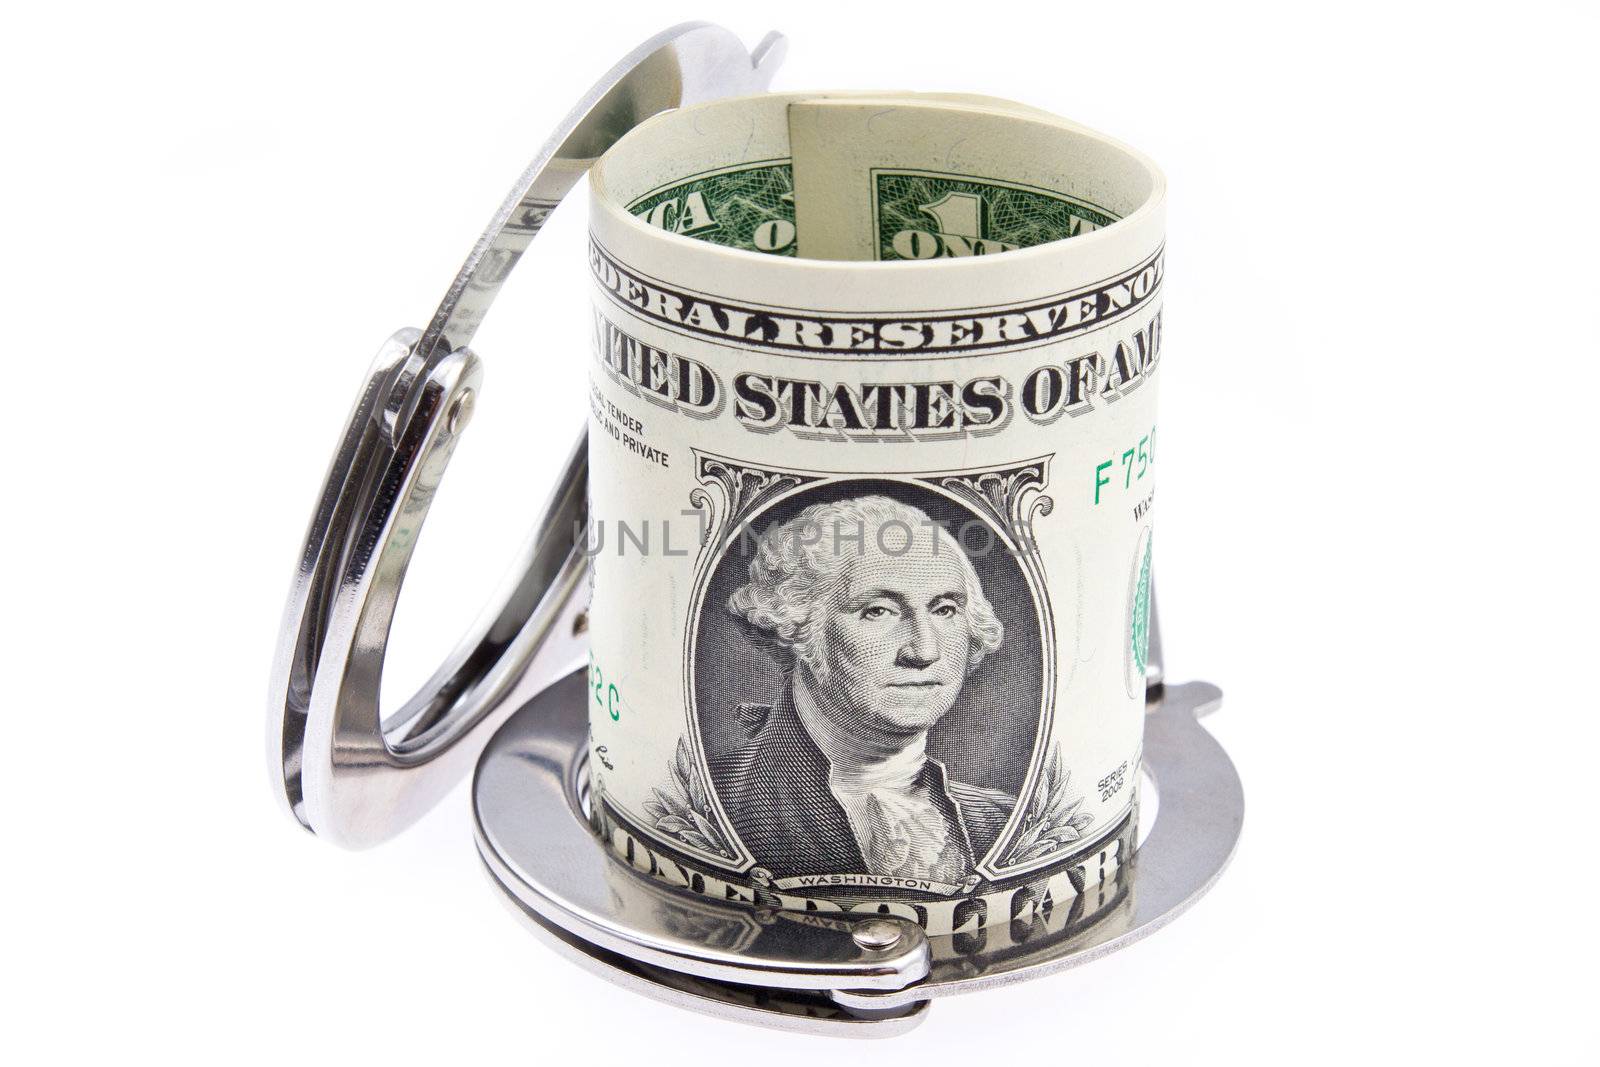 US Dollar, money, banknotes, currency, nadcuffs, crime